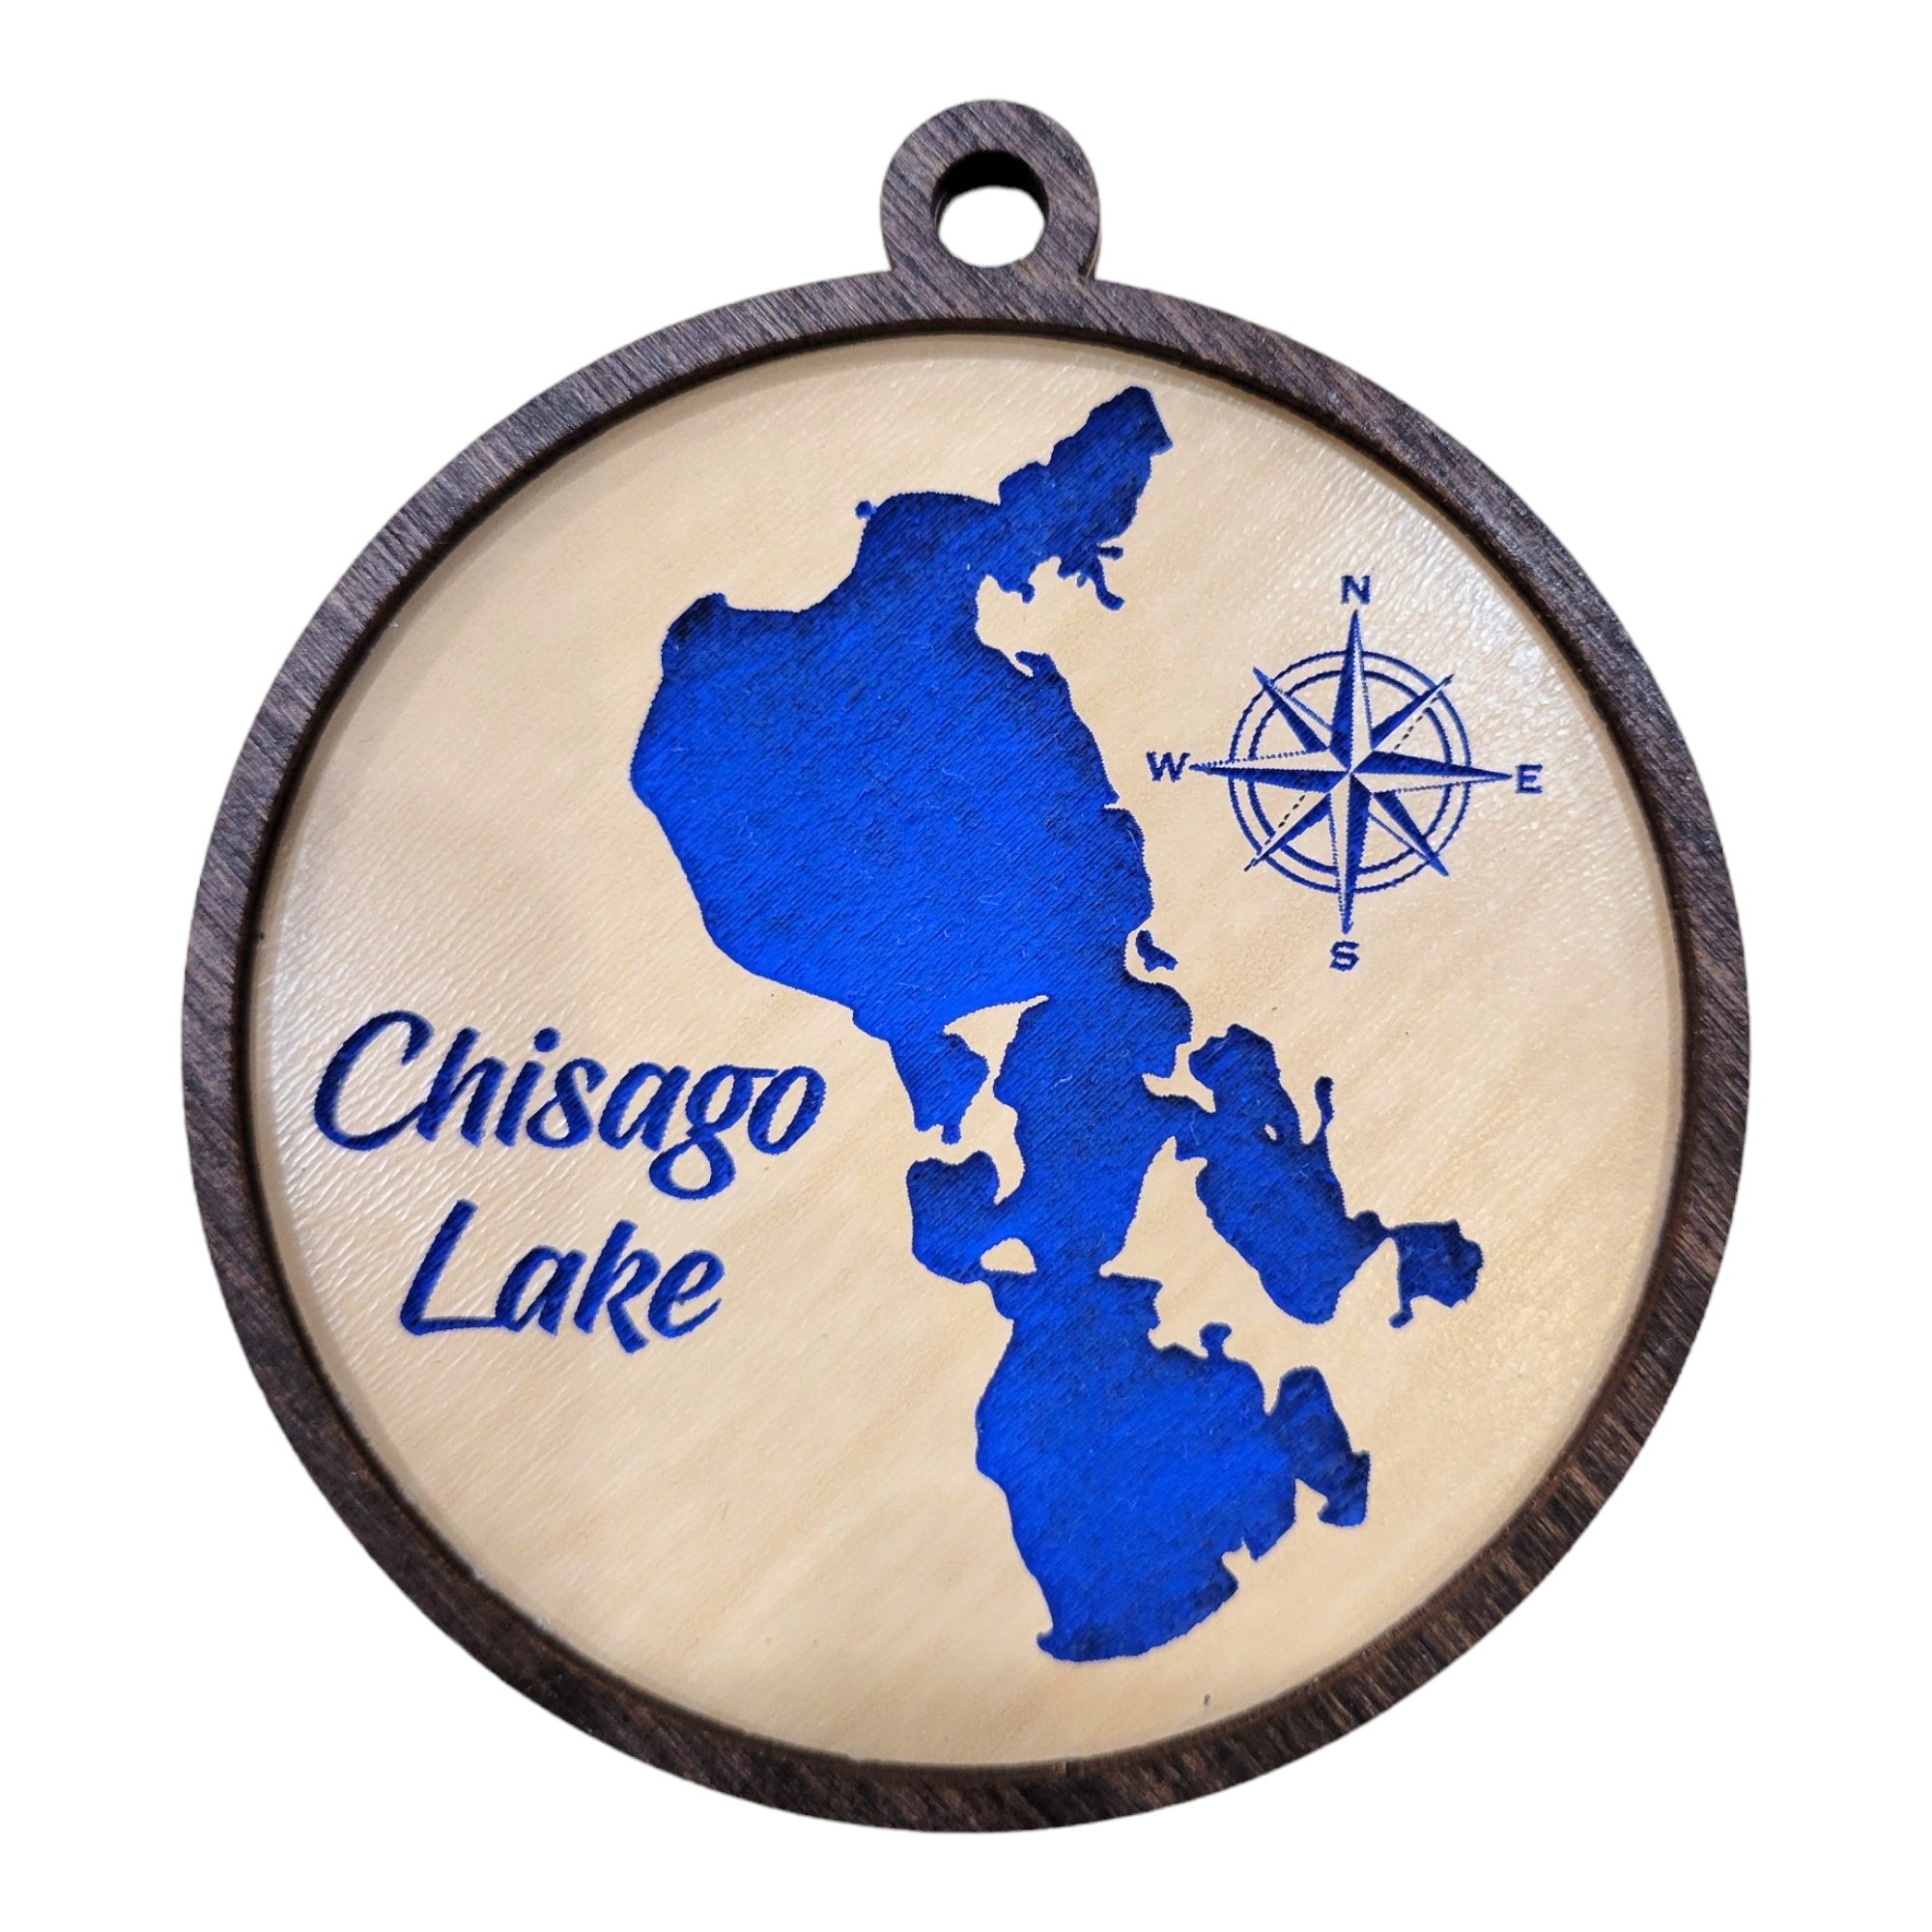 Ornament: Chisago Lake - Round Etched Wood